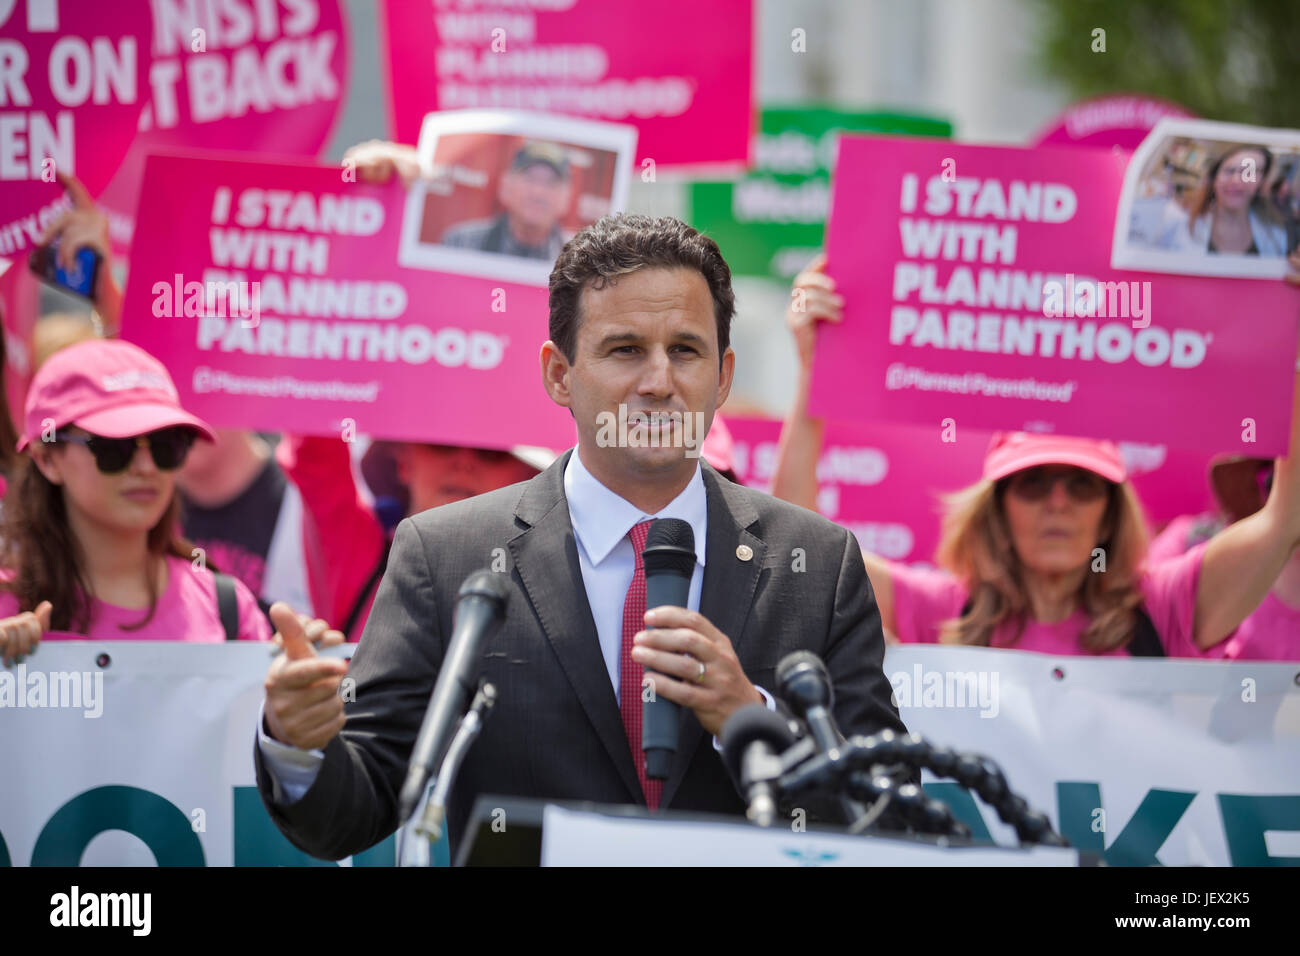 Washington, DC, USA. 27th June, 2017. Planned Parenthood supporters protest in front of the US Capitol building. Stock Photo